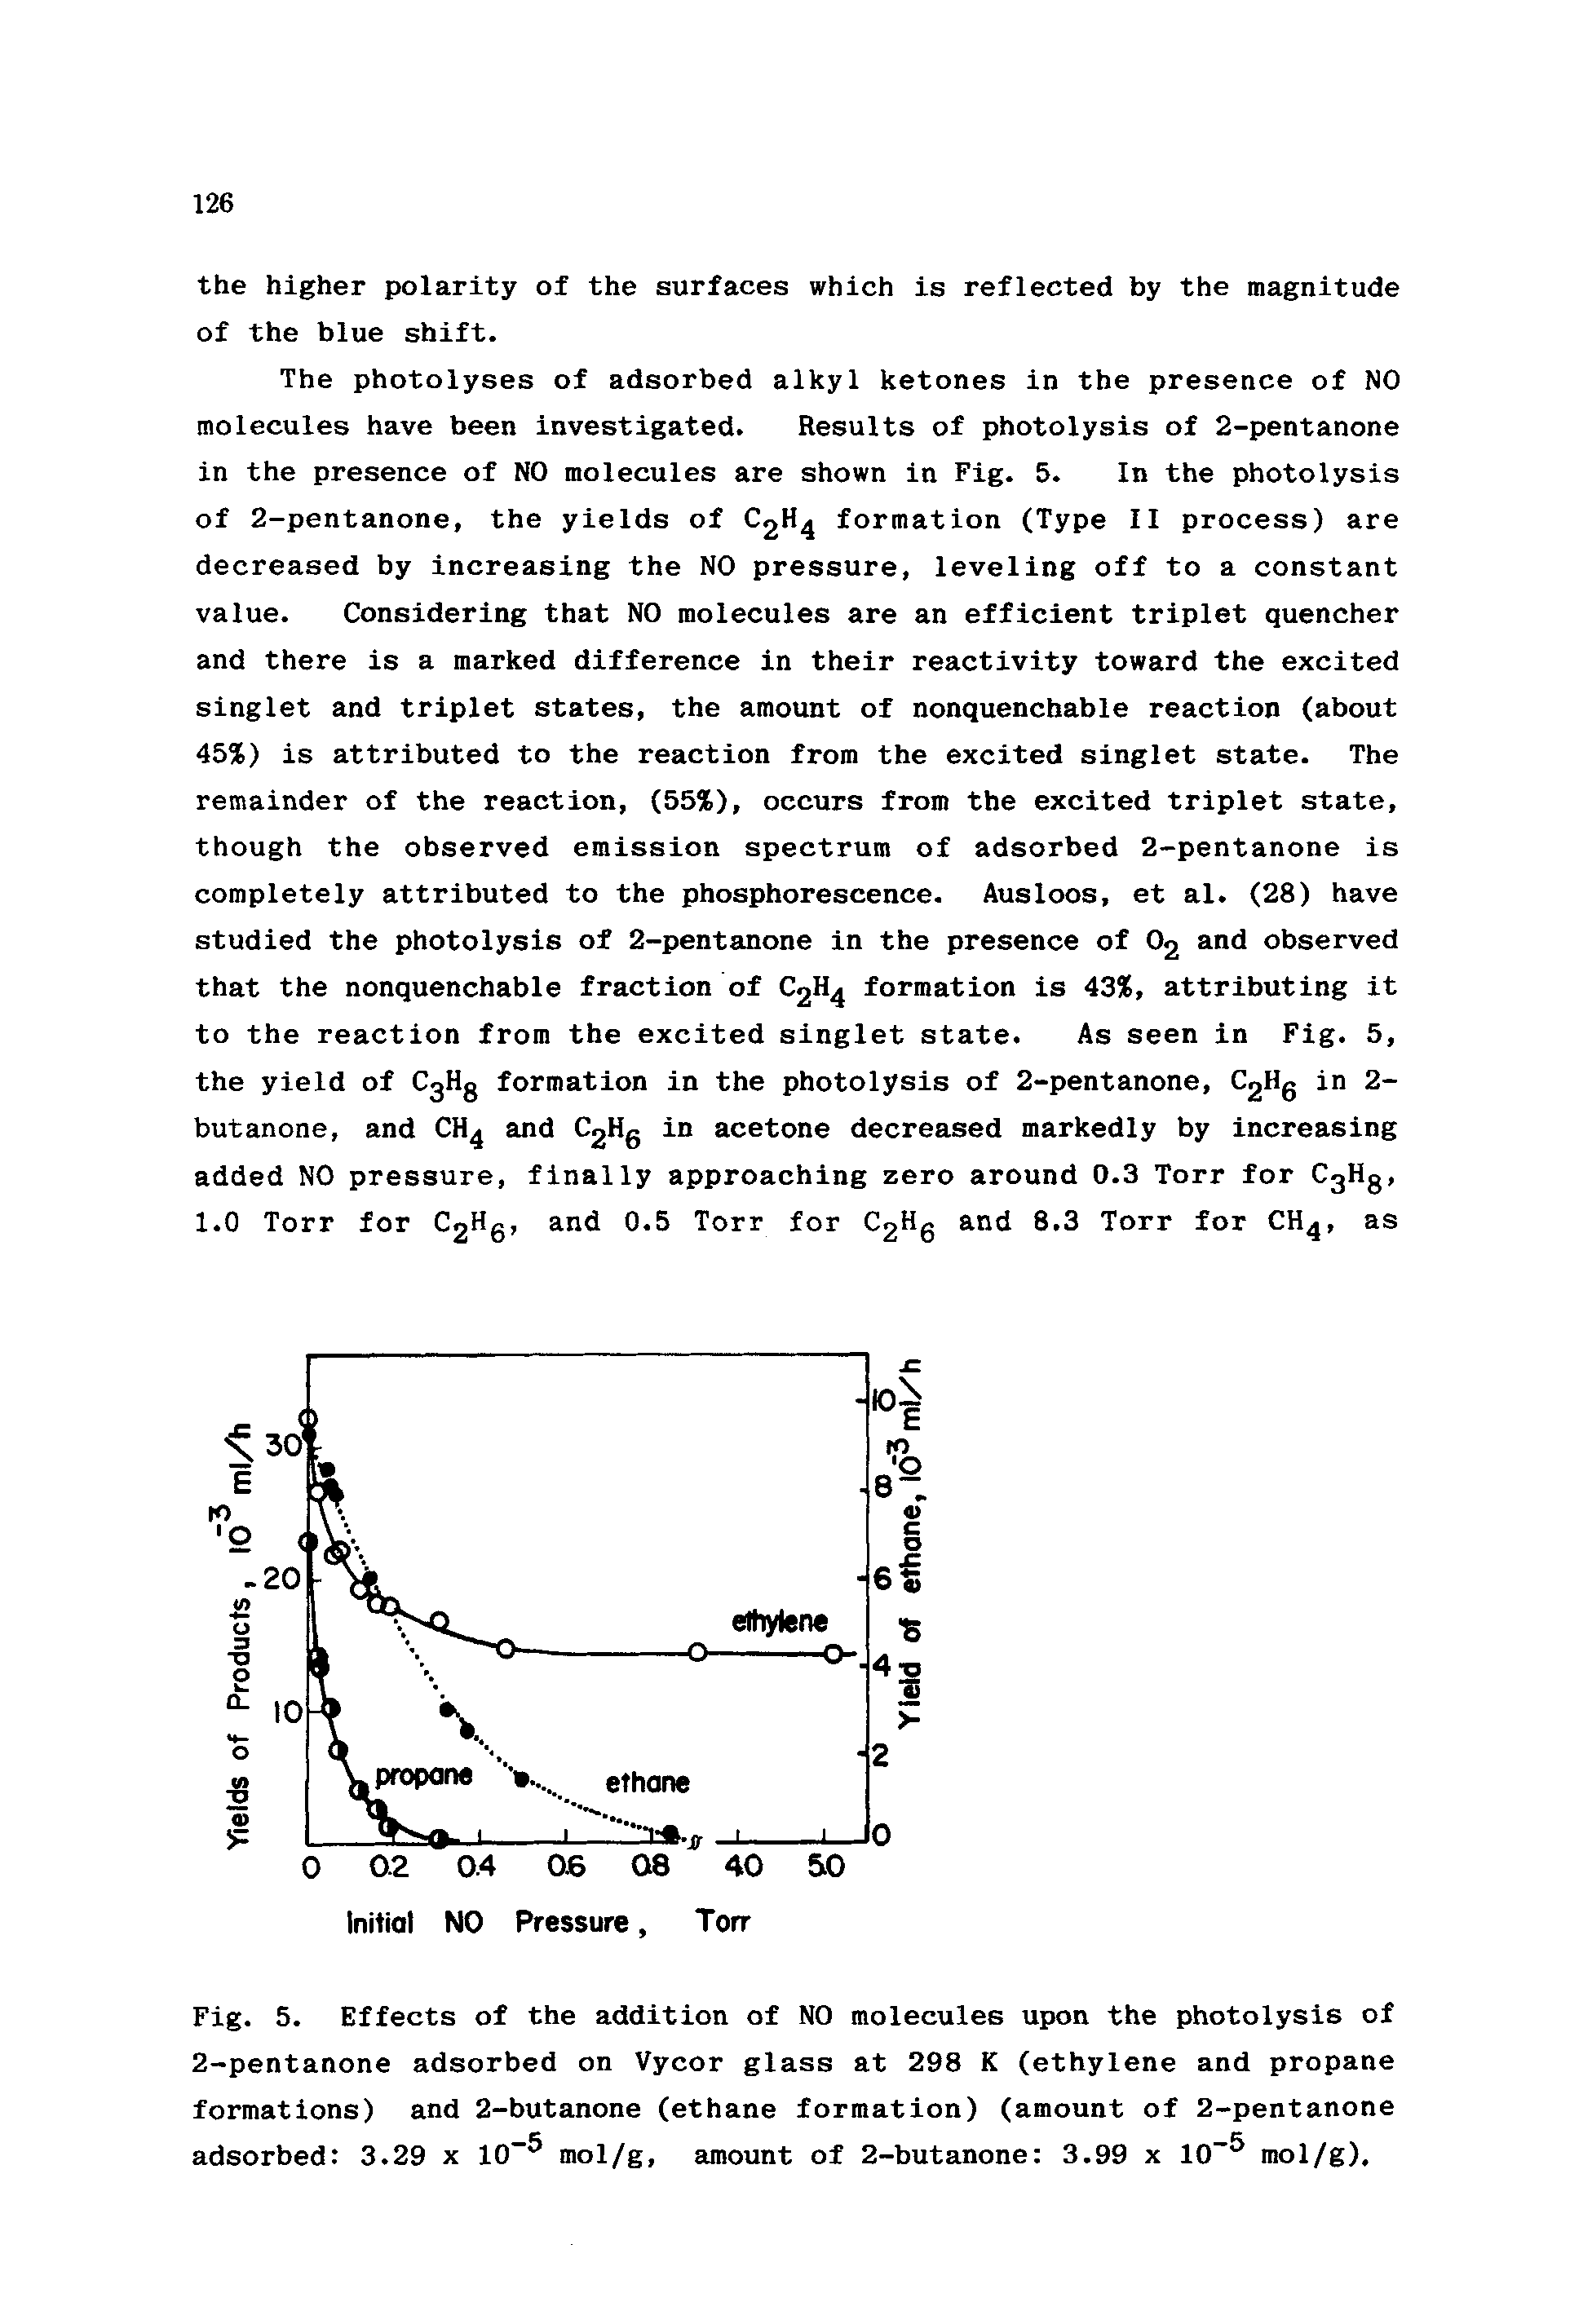 Fig. 5. Effects of the addition of NO molecules upon the photolysis of 2-pentanone adsorbed on Vycor glass at 298 K (ethylene and propane formations) and 2-butanone (ethane formation) (amount of 2-pentanone adsorbed 3.29 x 10 mol/g, amount of 2-butanone 3.99 x 10 mol/g).